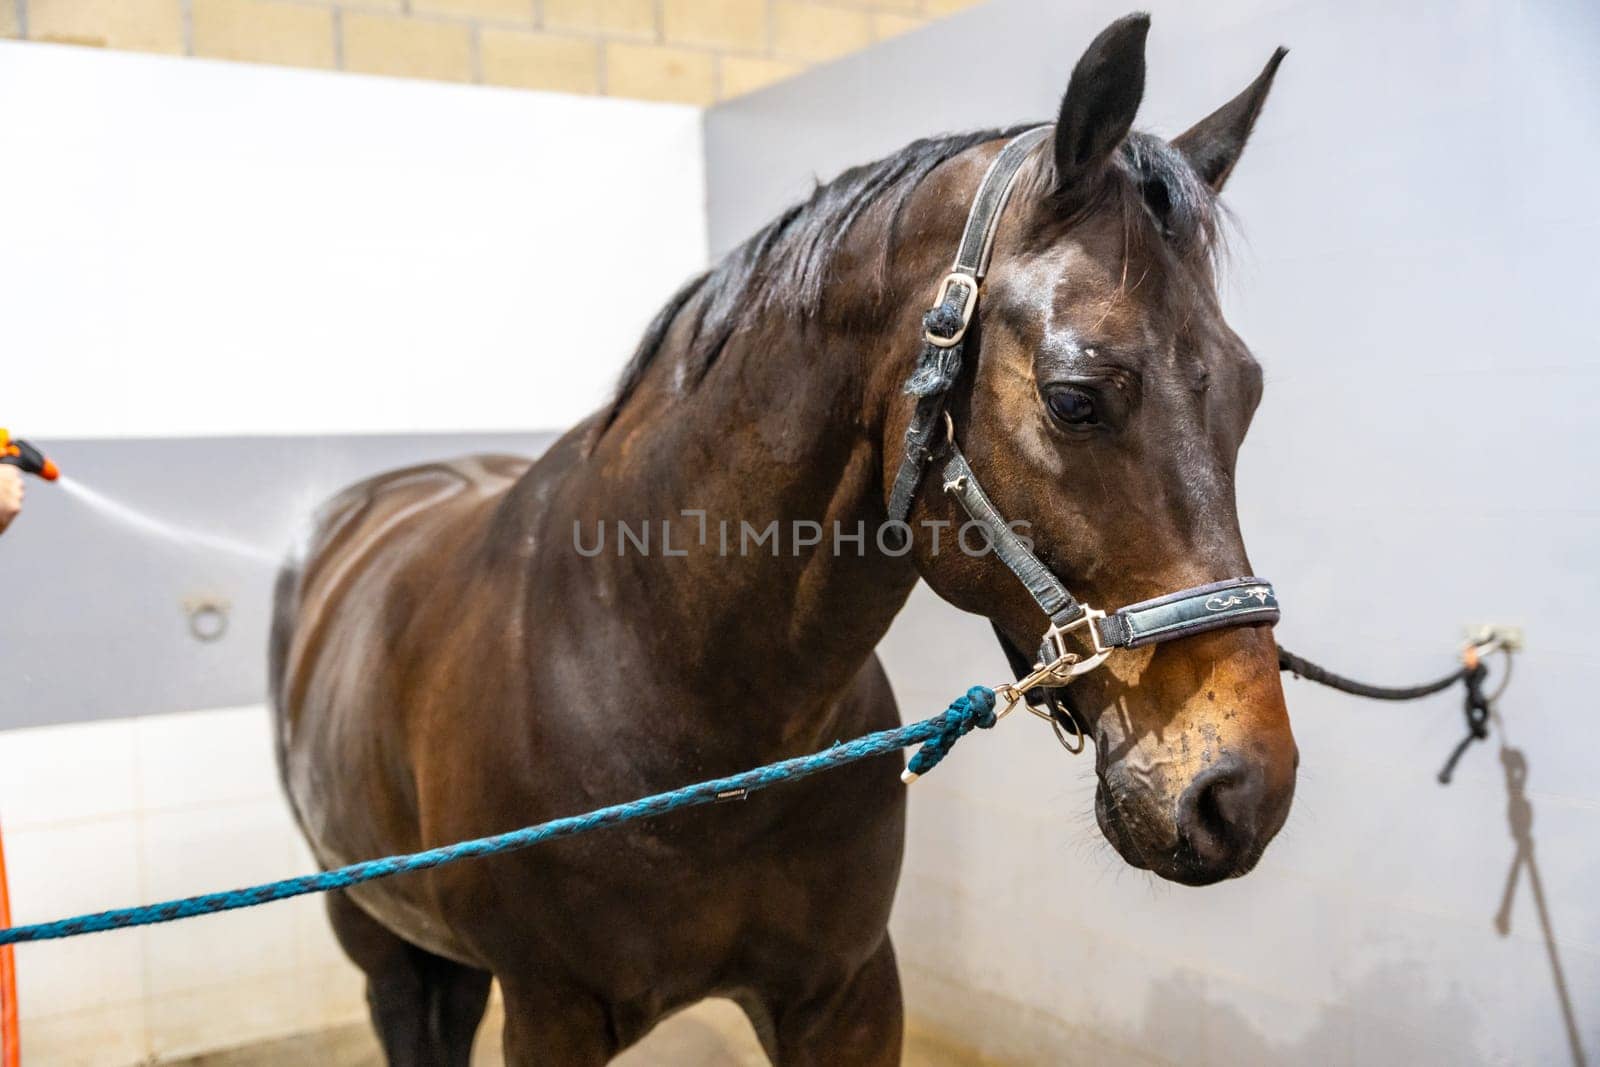 Horse receiving a shower in a rehabilitation center by Huizi